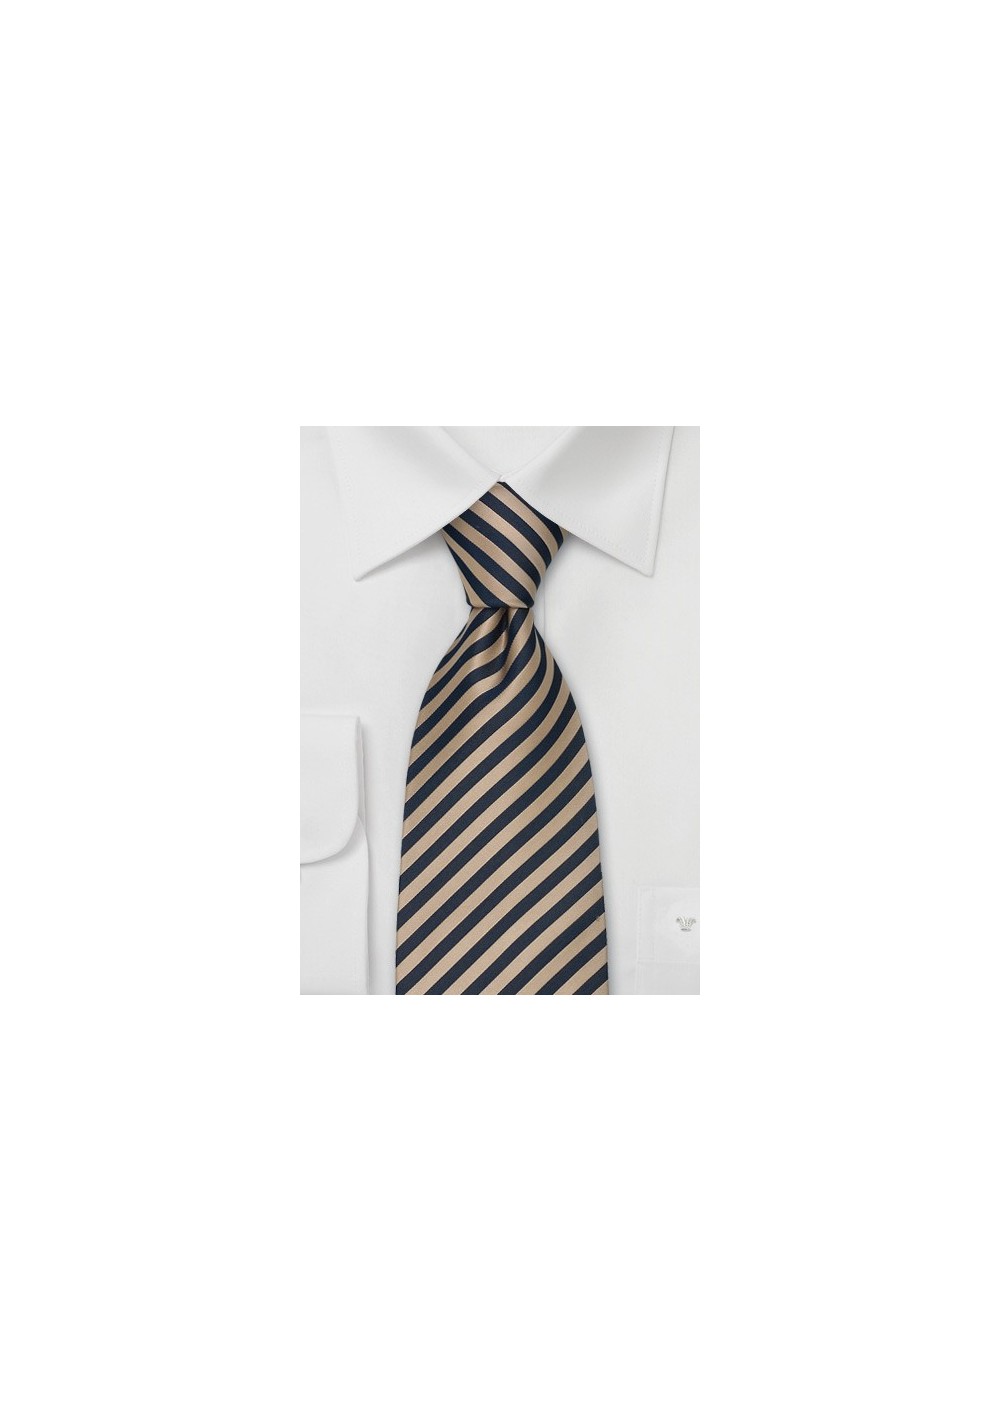 Striped Extra Long Ties - Brown & Blue Striped Tie in XL